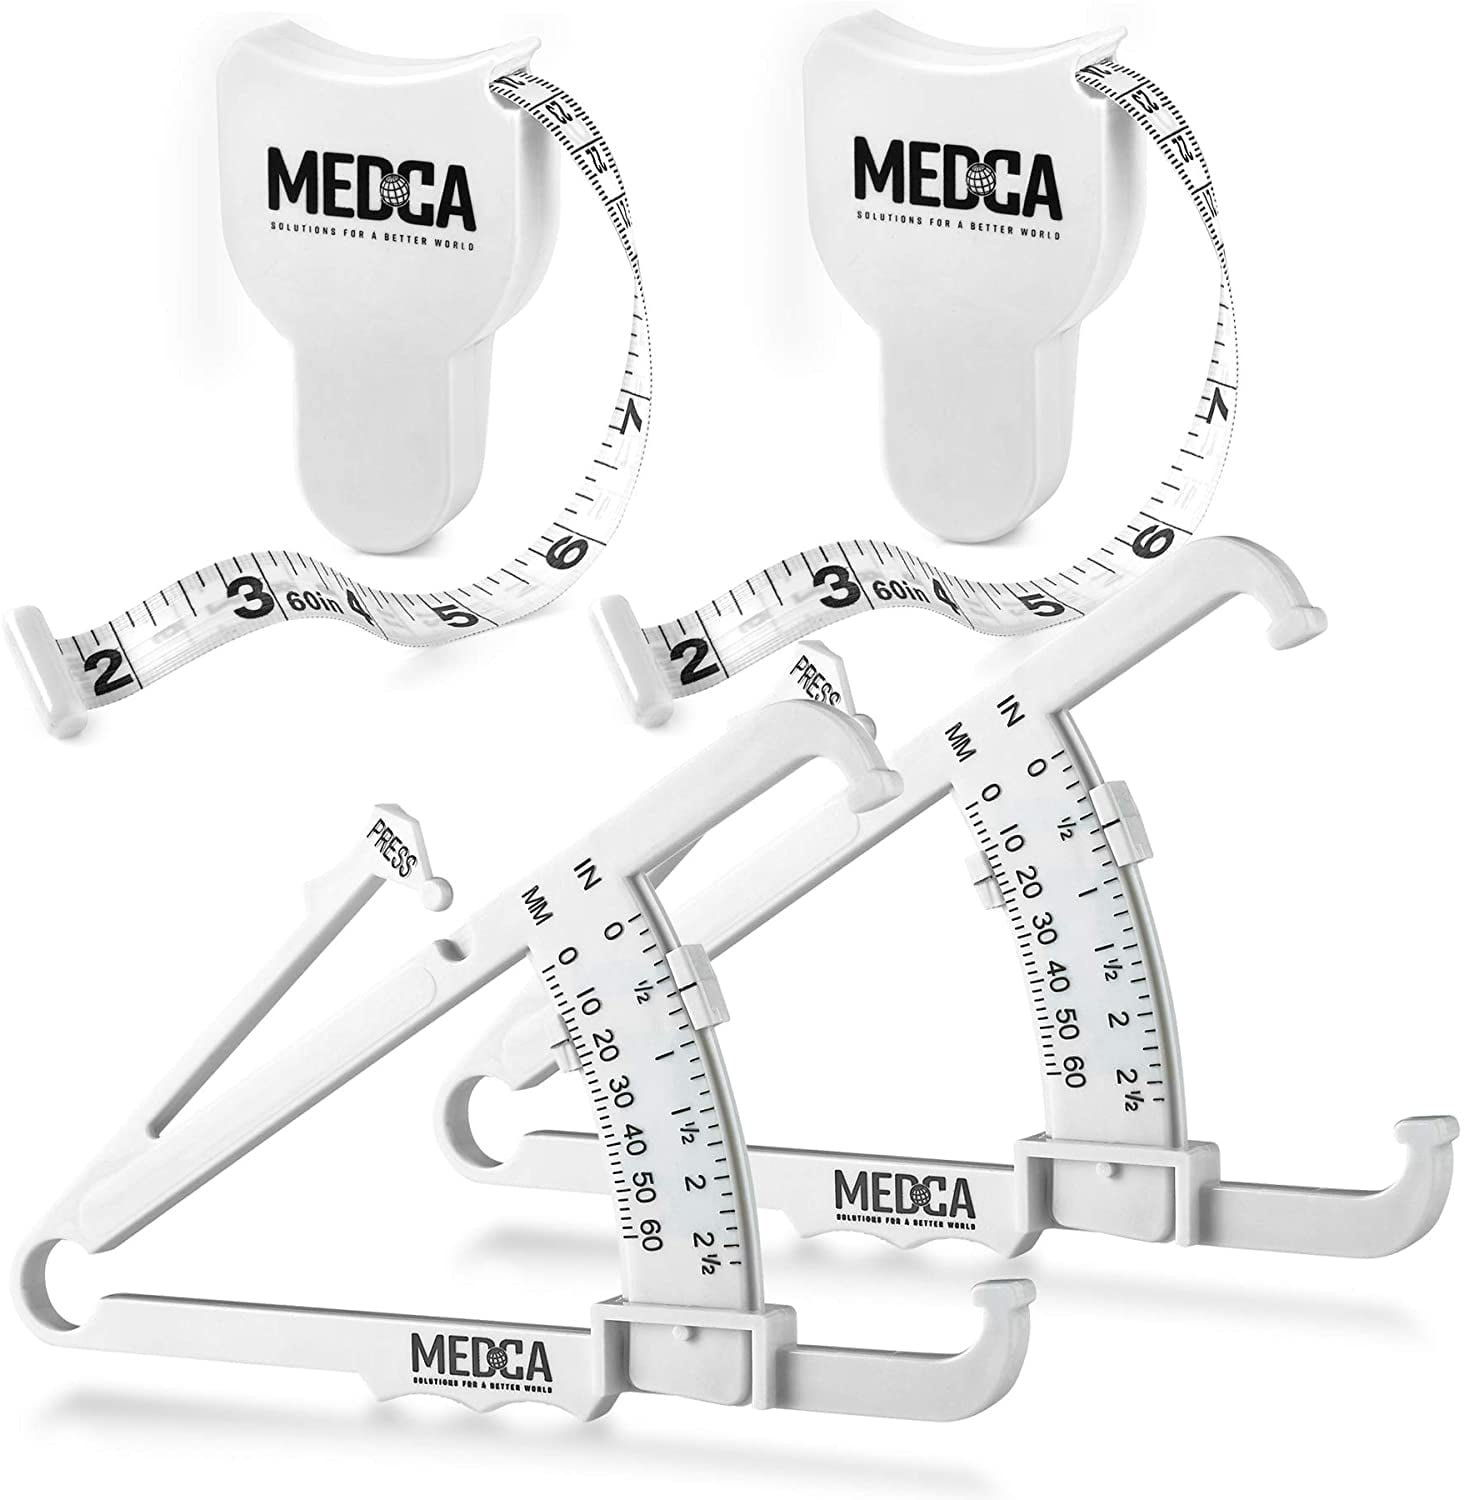 4 Pack MEDca Body Fat Calliper and Measuring Tape for Body Skinfold Callipers 